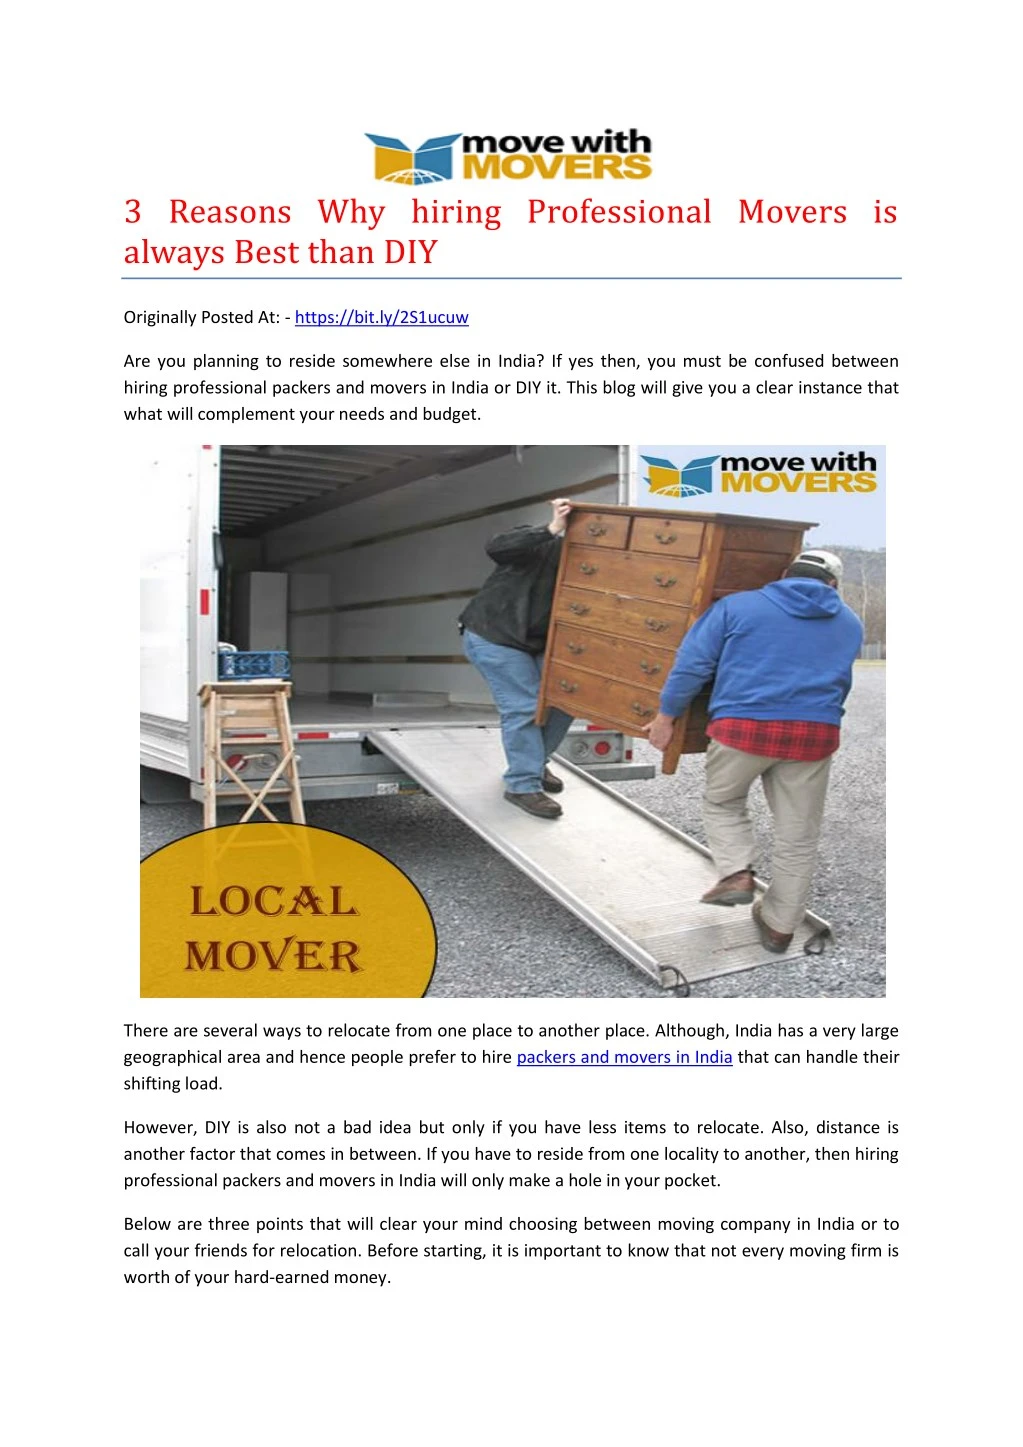 3 reasons why hiring professional movers